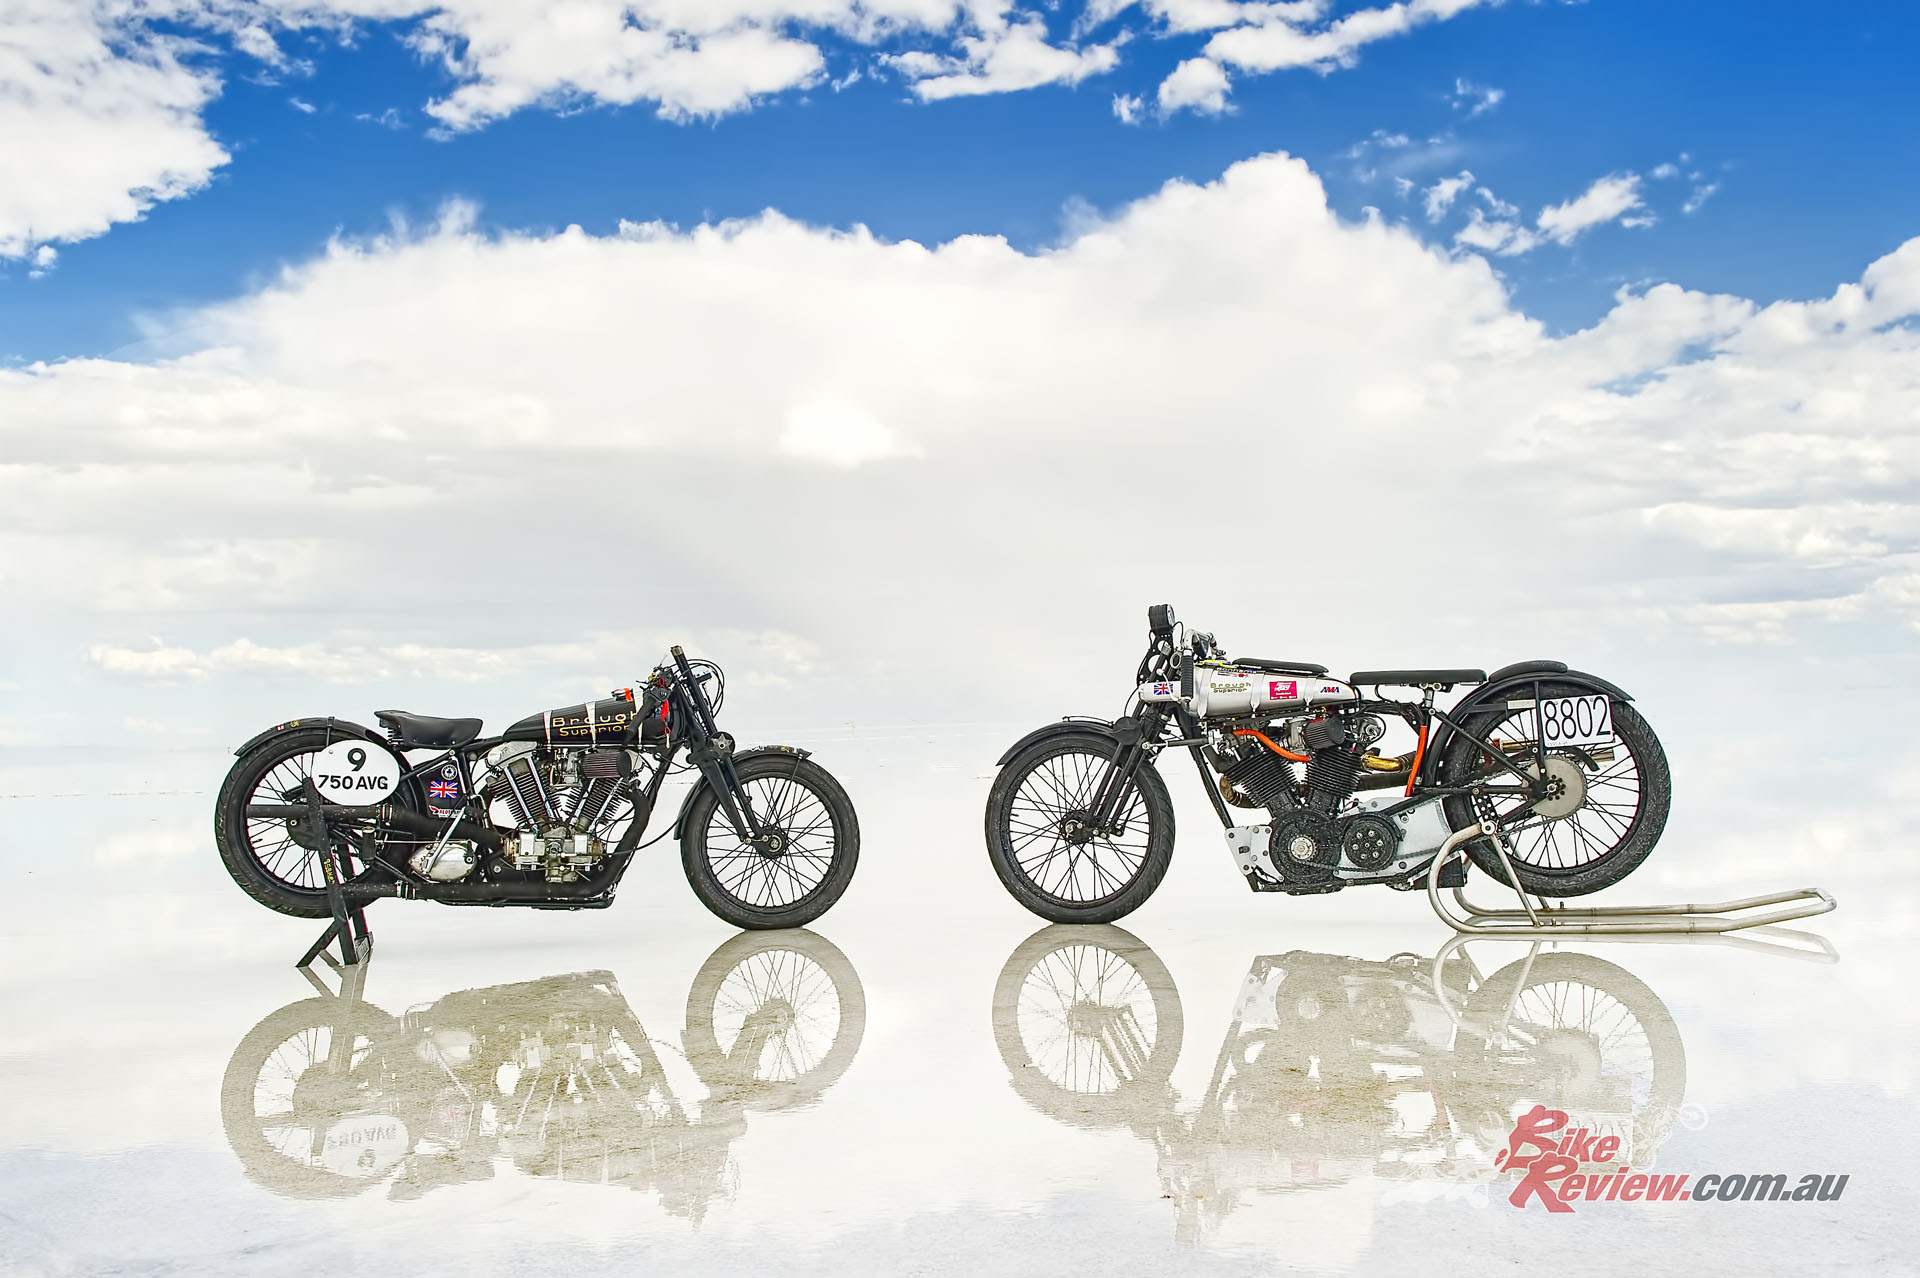 Brough Superior, founded in 1919, was the so-called Rolls-Royce of Motorcycles, the manufacturer of the world’s fastest, most desirable and most exclusive motorcycles in the pre-WW2 era. AC Set some world-records on one!